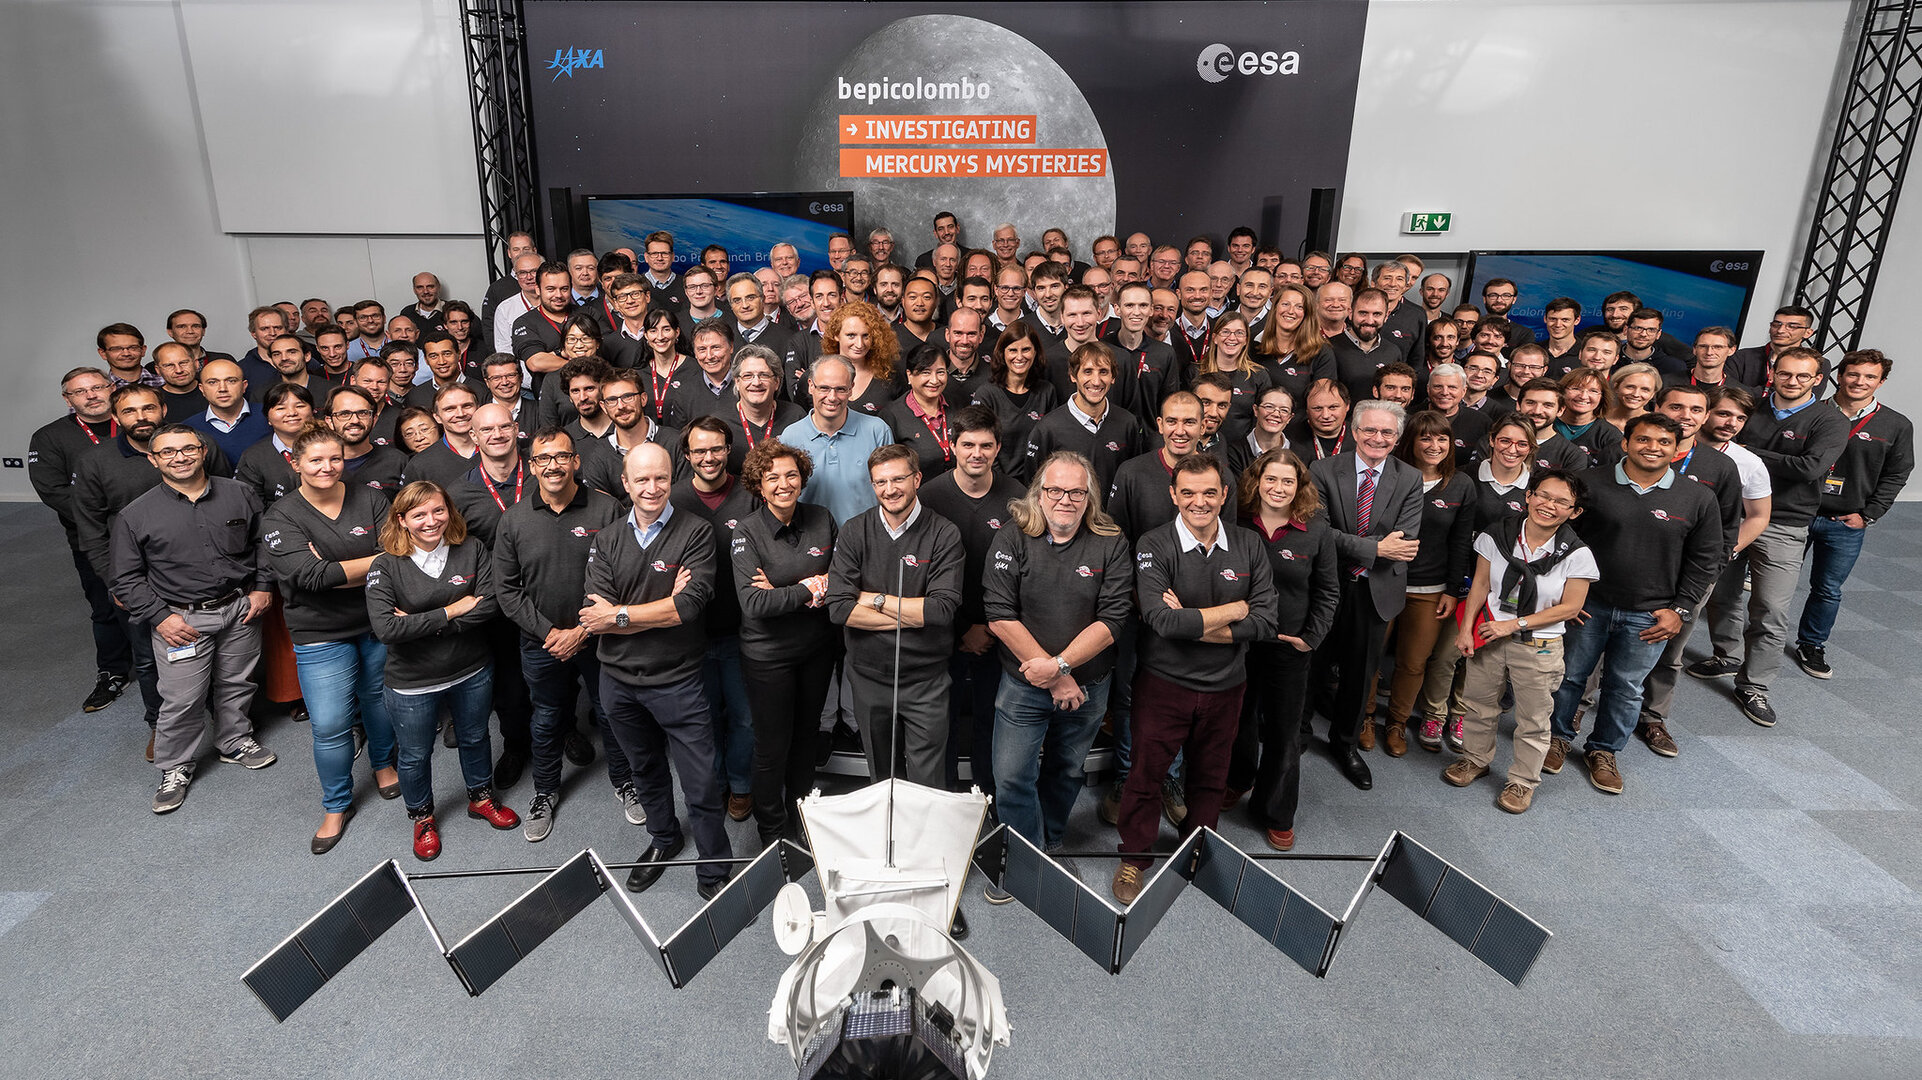 After years of planning and countless hours of simulations, mission teams at ESA’s control centre in Germany are ready to take flight on the long and complex journey to Mercury